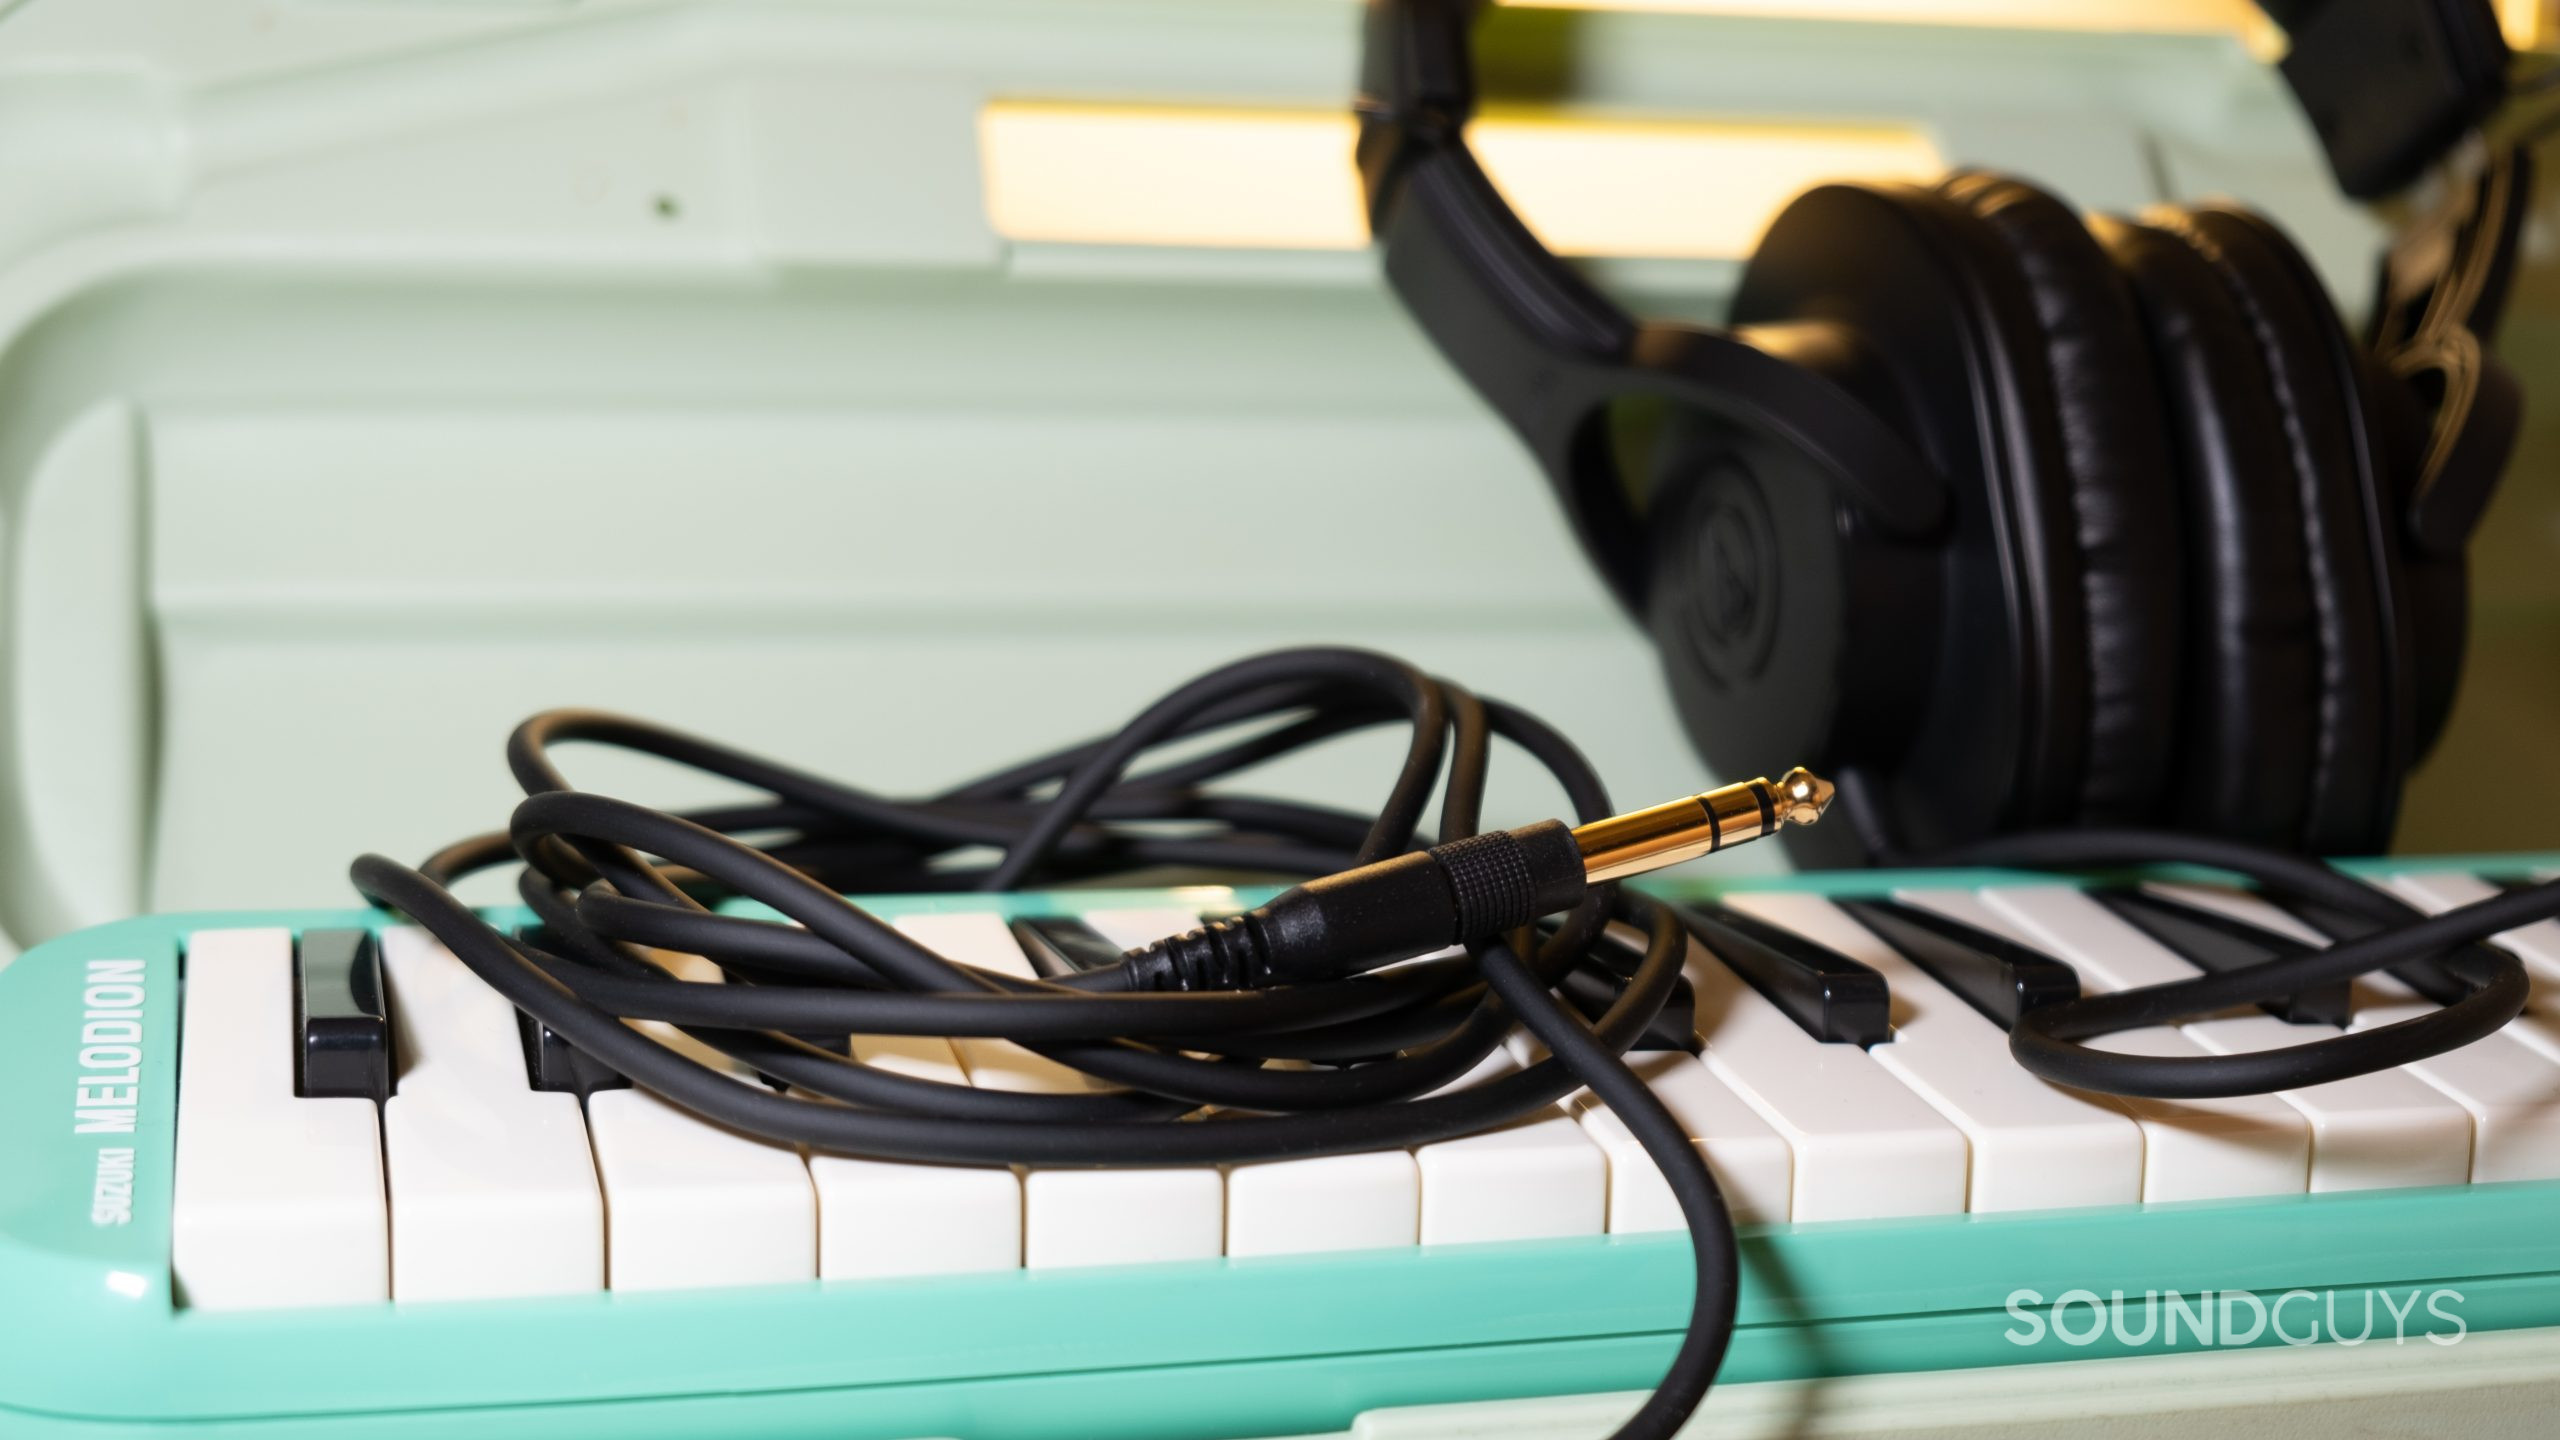 The Audio-Technica ATH-M20x resting with a melodion with the three meter cable in focus.